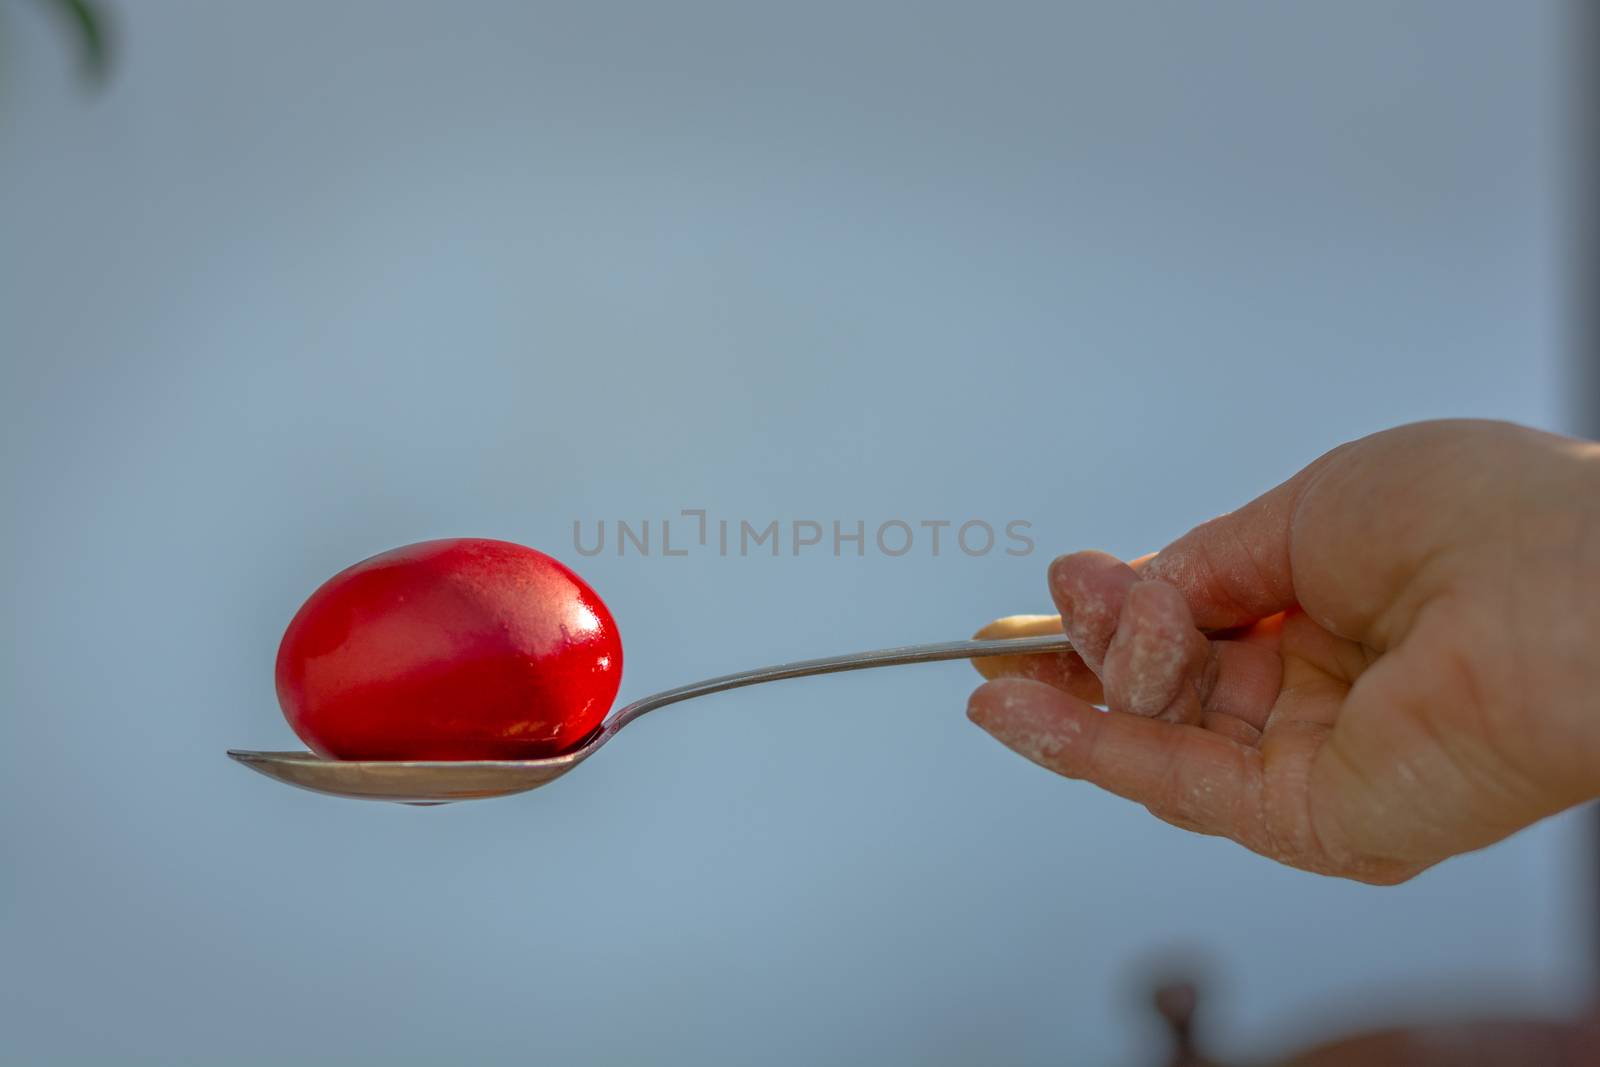 The first red Еaster egg going out of the painт in a metal spoon.